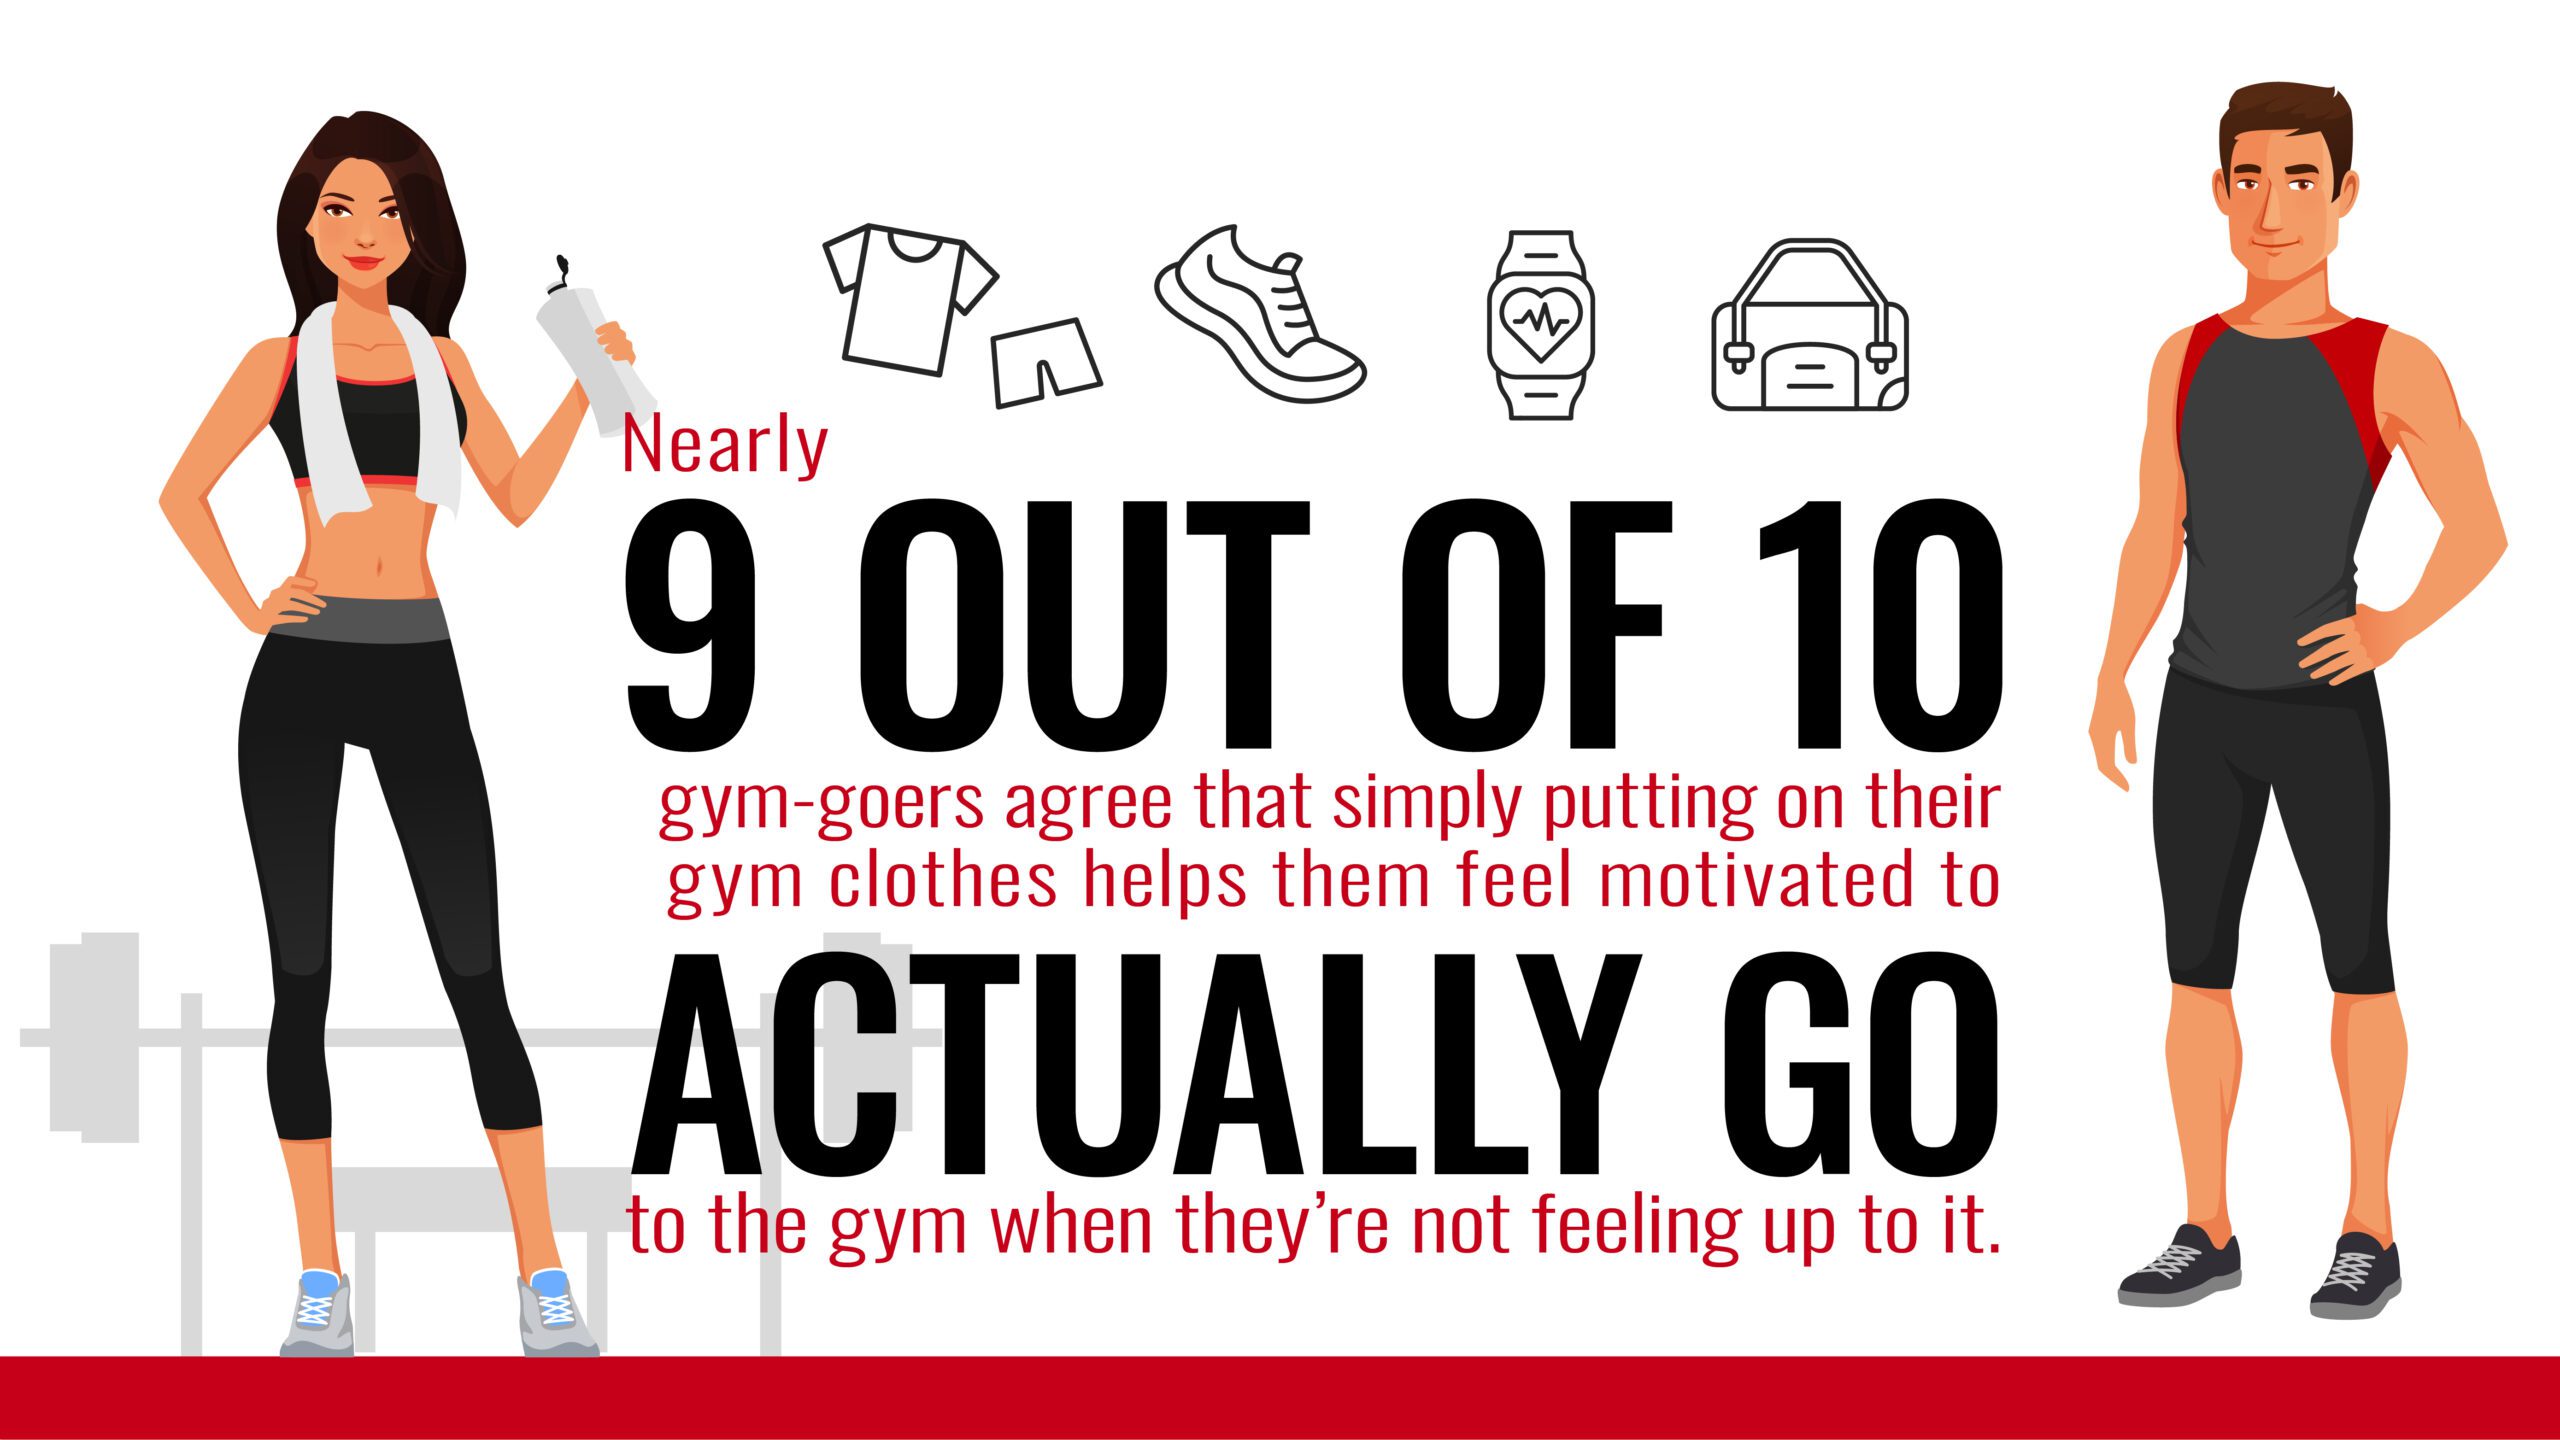 The secret to getting fit is getting new clothes, study finds - digitalhub  US